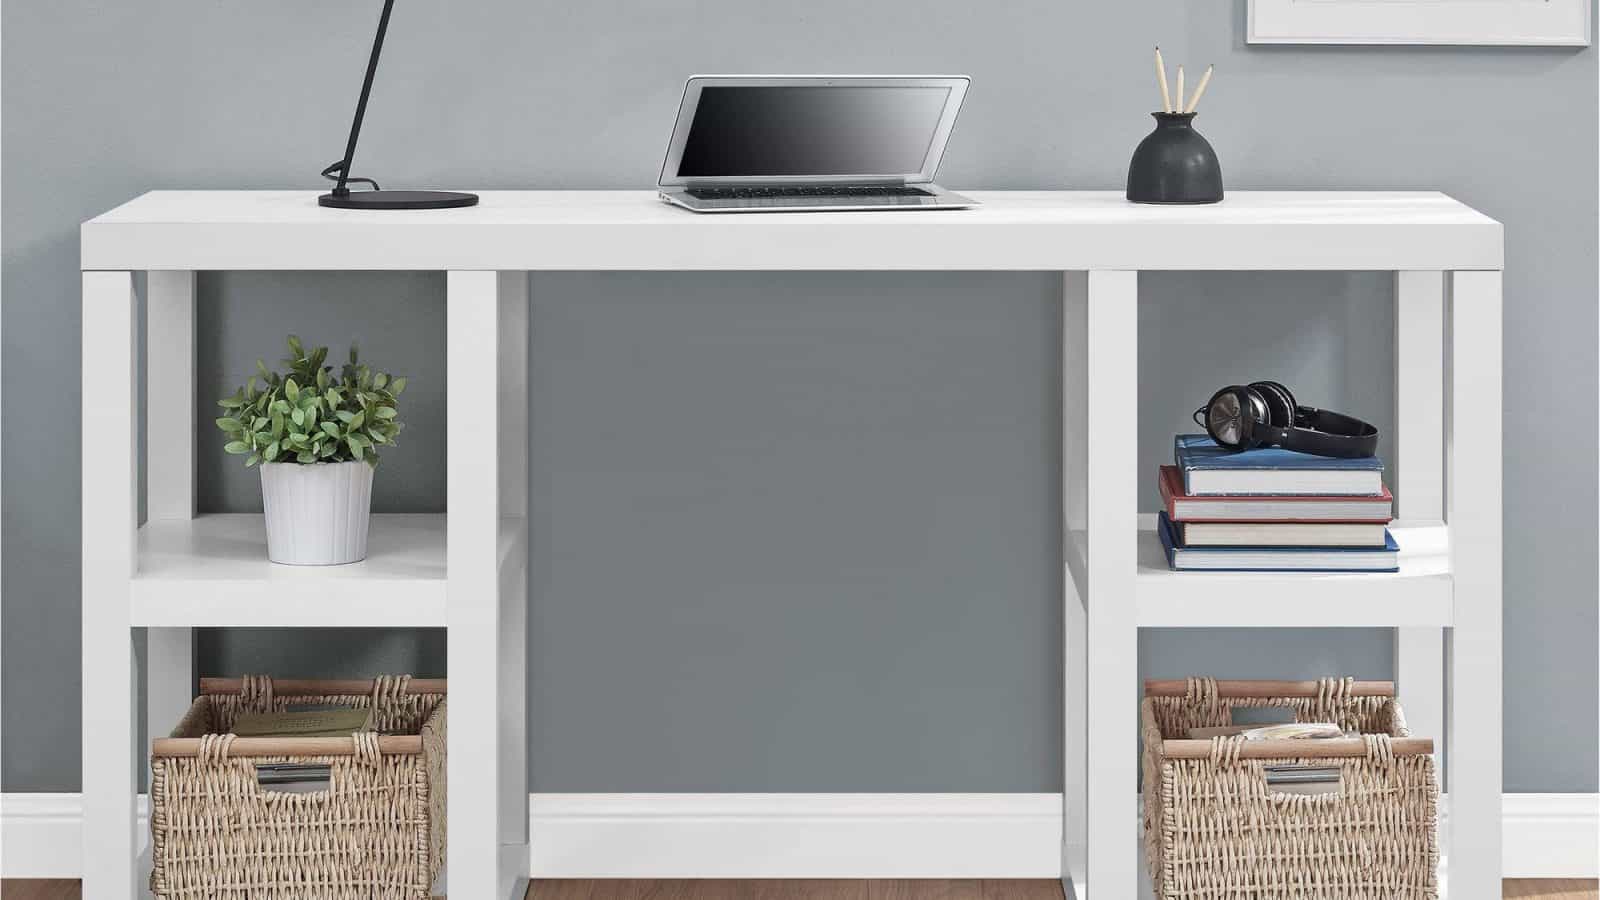 19 Diy Computer Desk Ideas With Methods And Tips For You Remodel Or Move